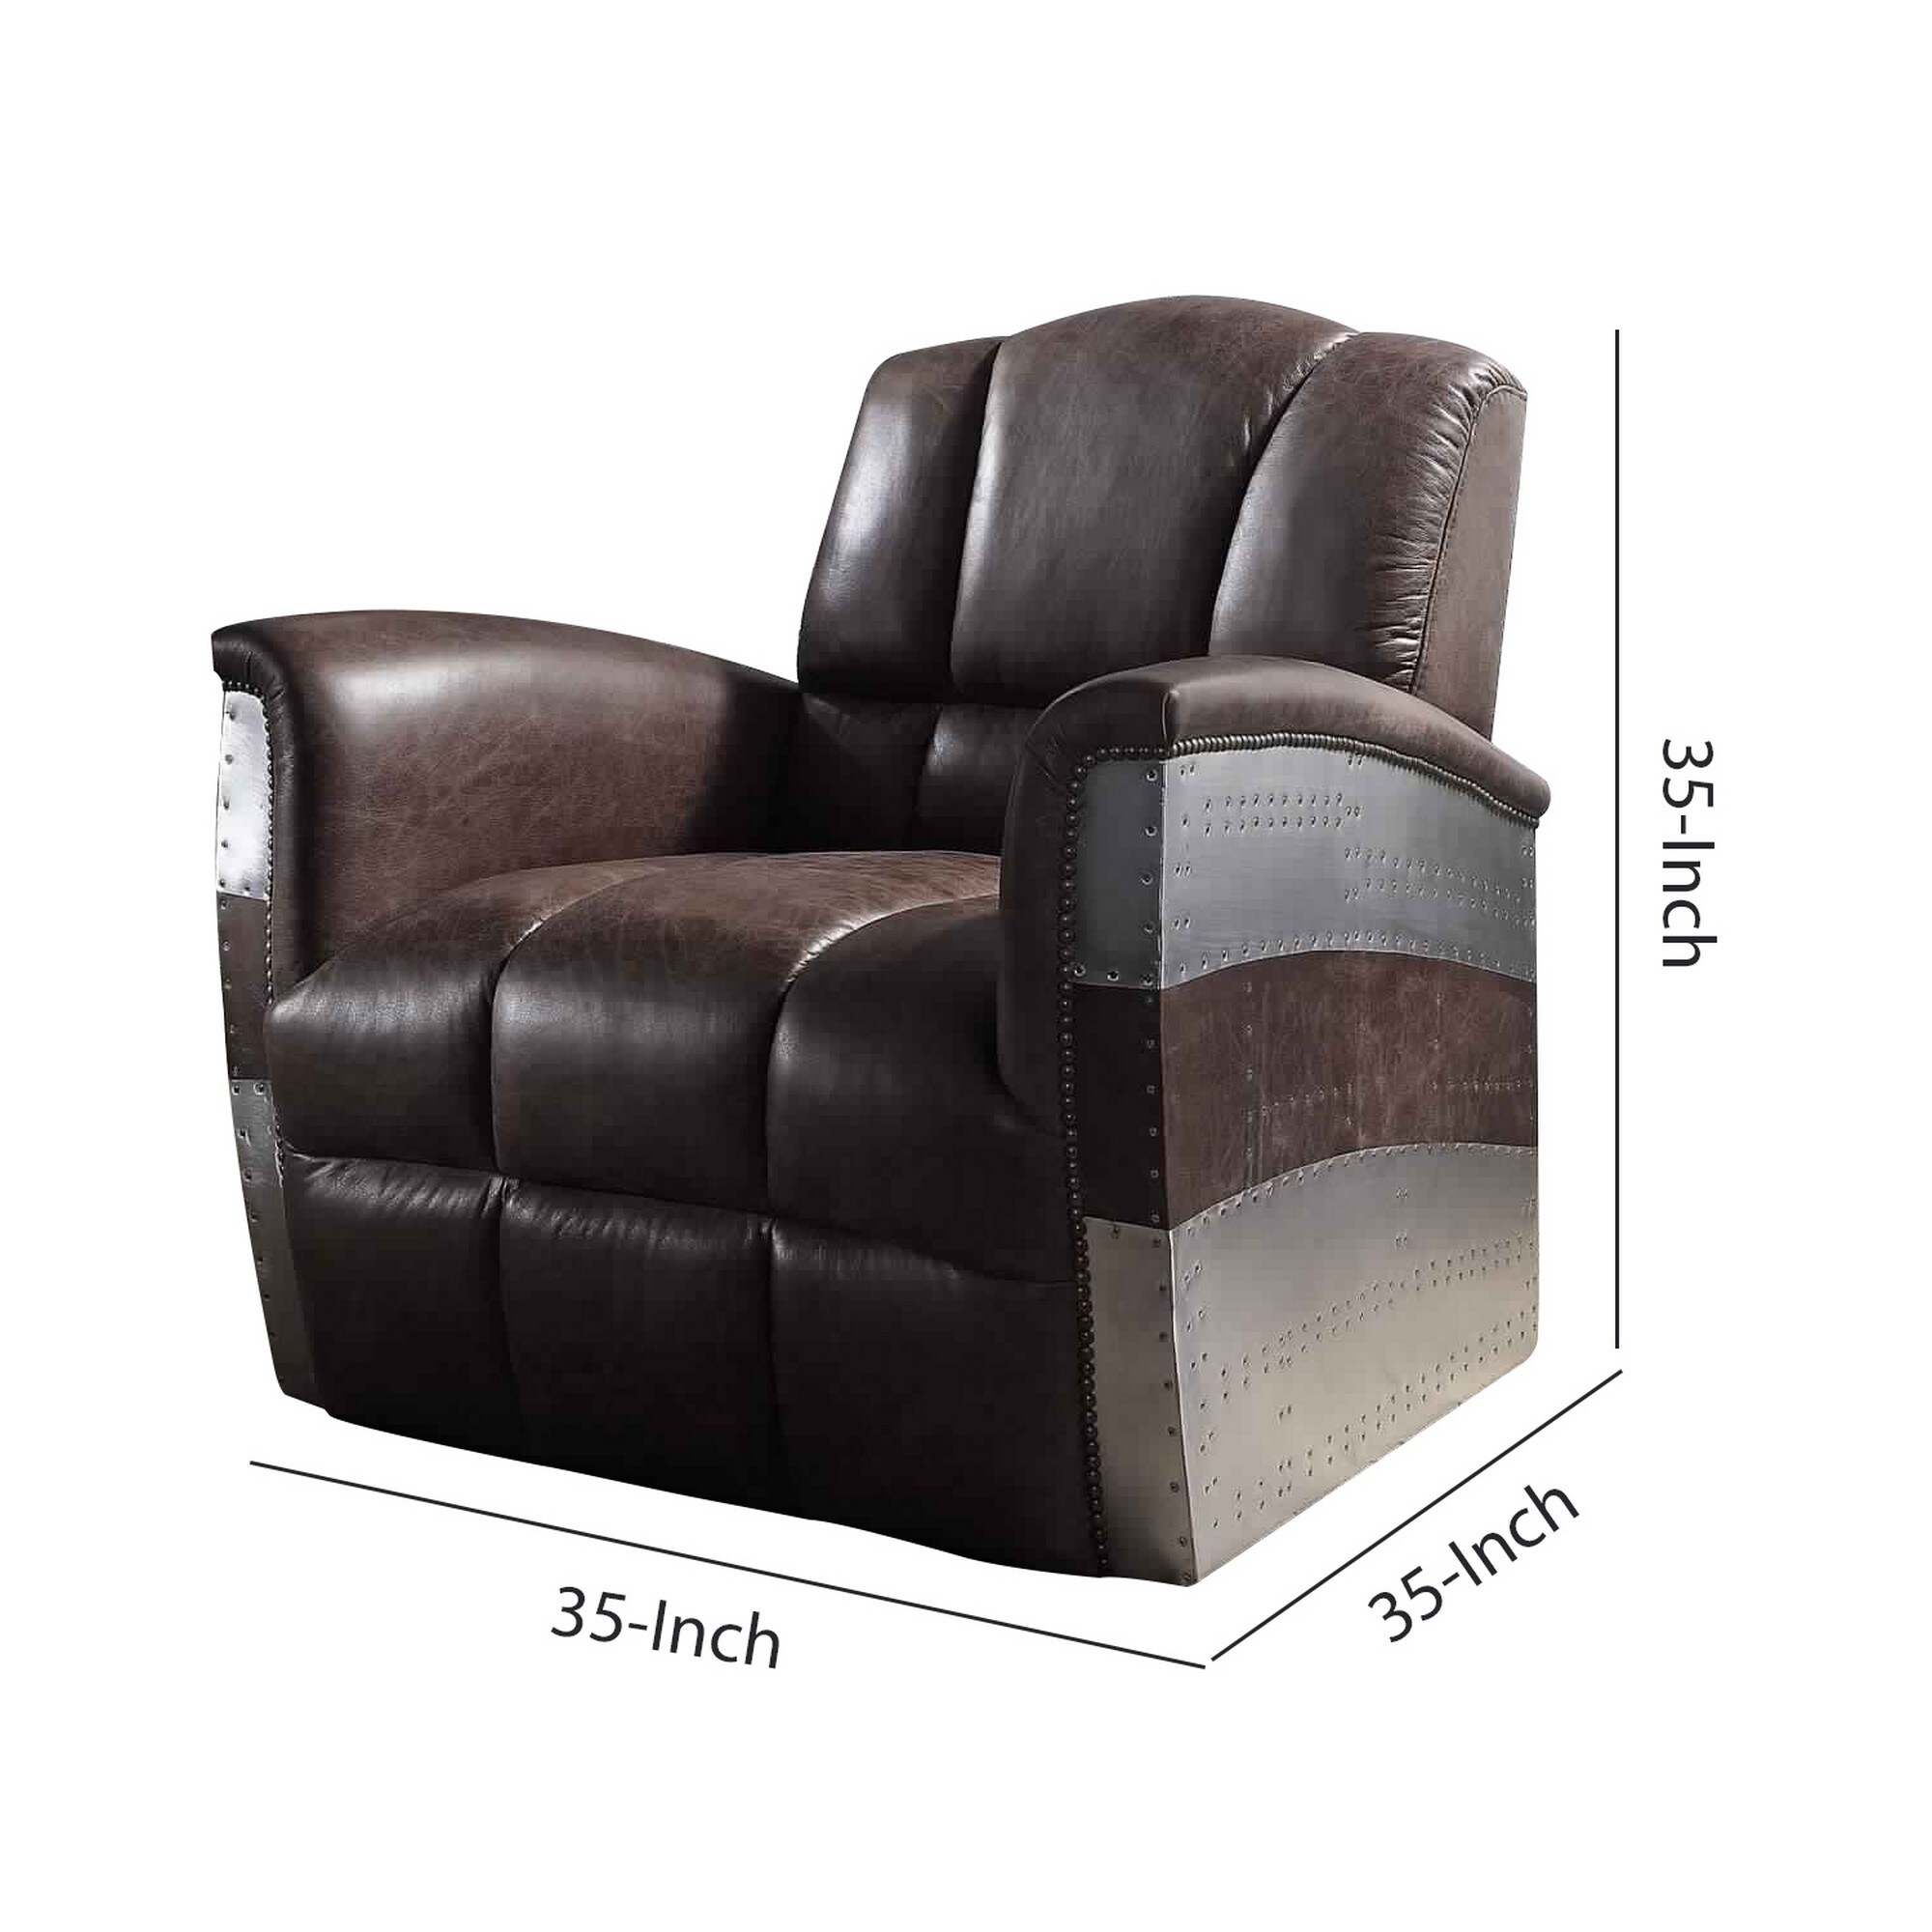 Vertically Tufted Lounge Chair with Aluminum Patchwork, Brown and Silver